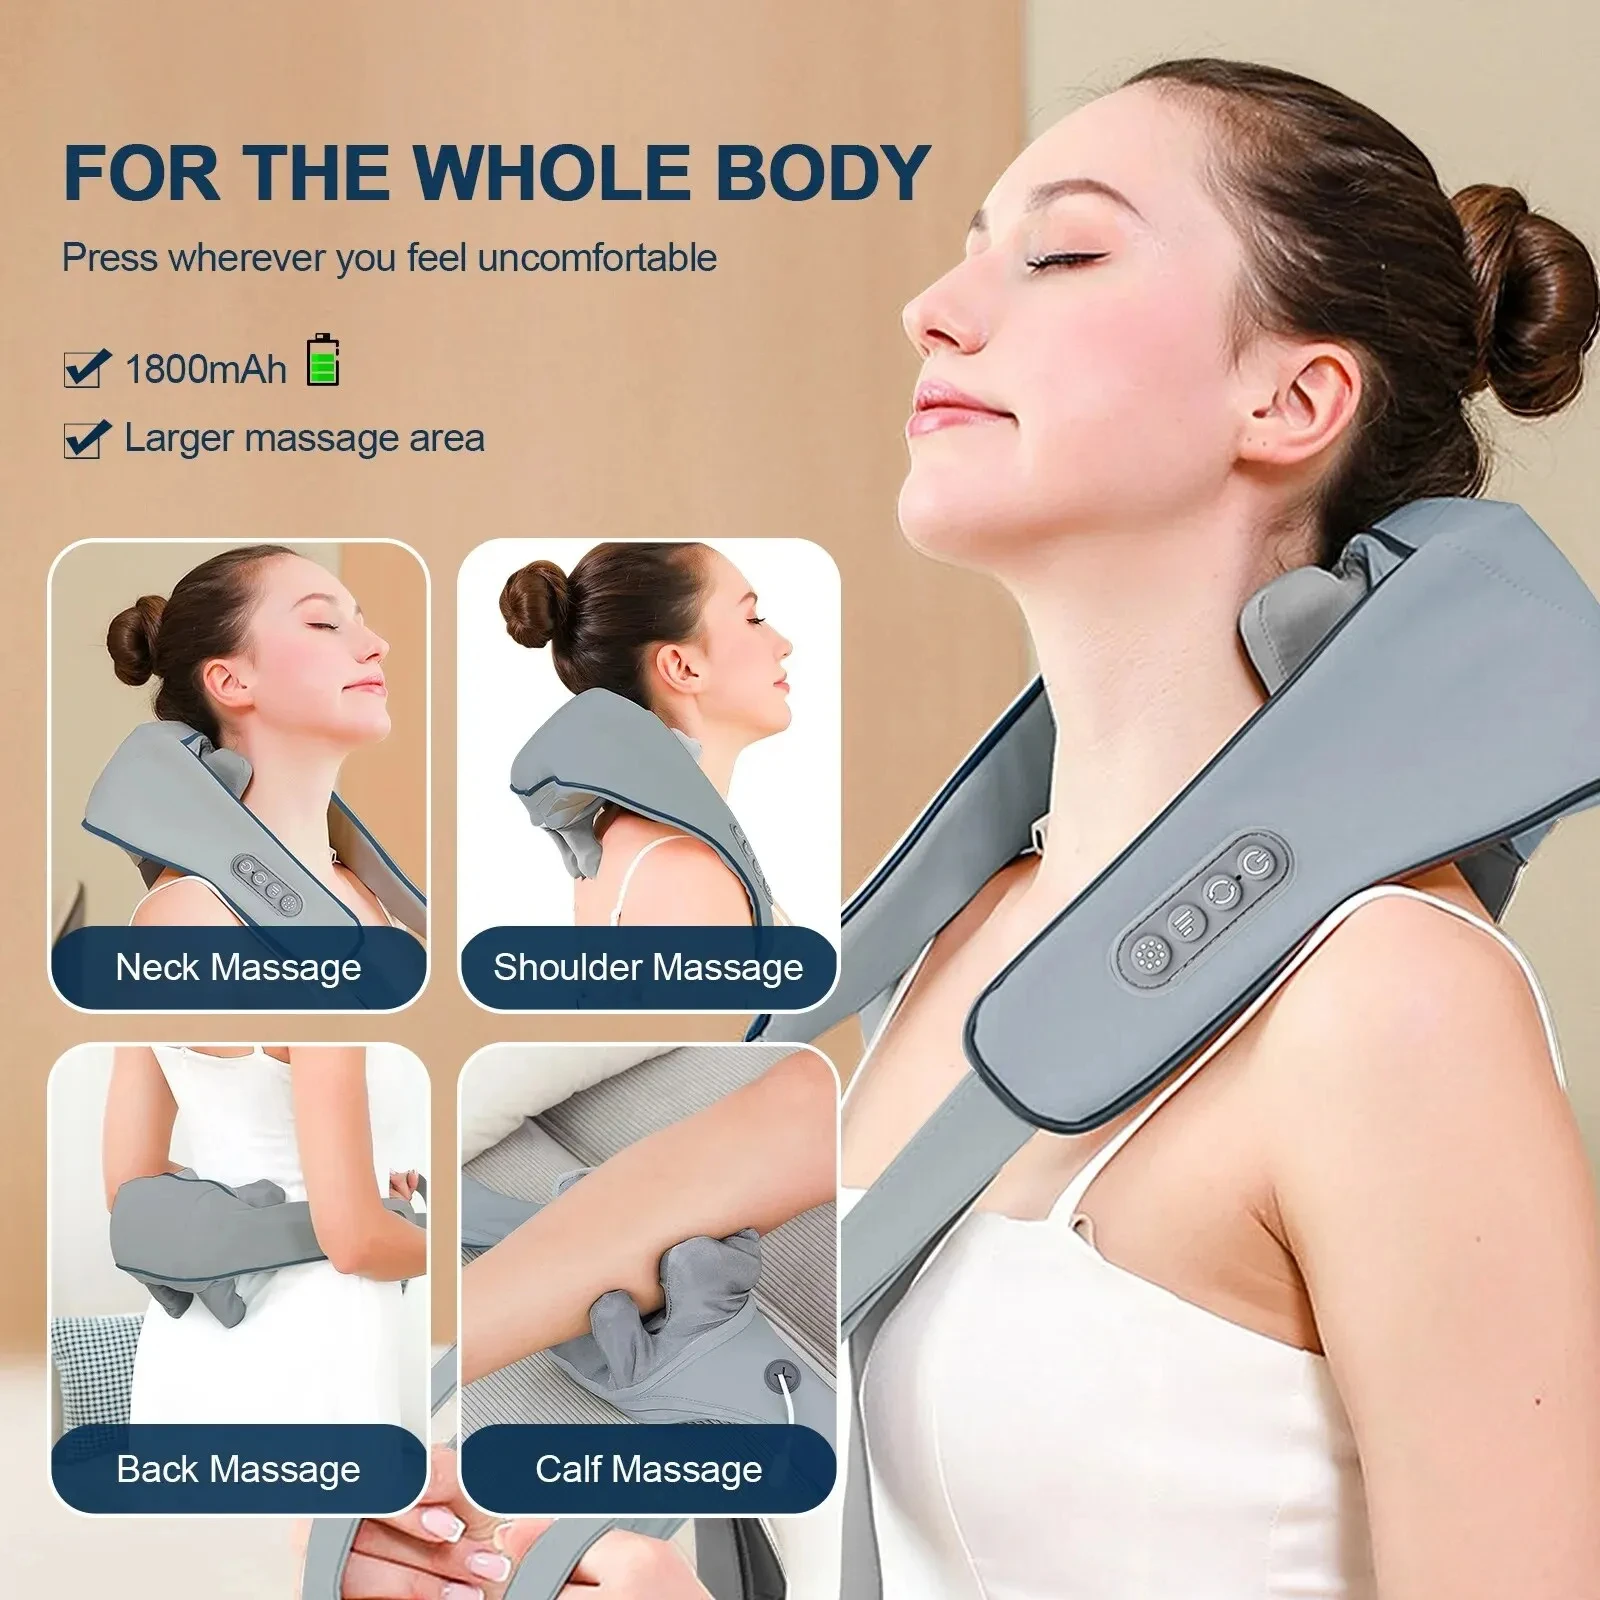 Neck And Shoulder Massager Wireless Neck And Back Shiatsu Kneading Massager Neck Cervical Relaxing Massage Shawl newest kneading shiatsu massage shawl neck and shoulder relaxing trapezius muscle warm compress rechargeable protable gift